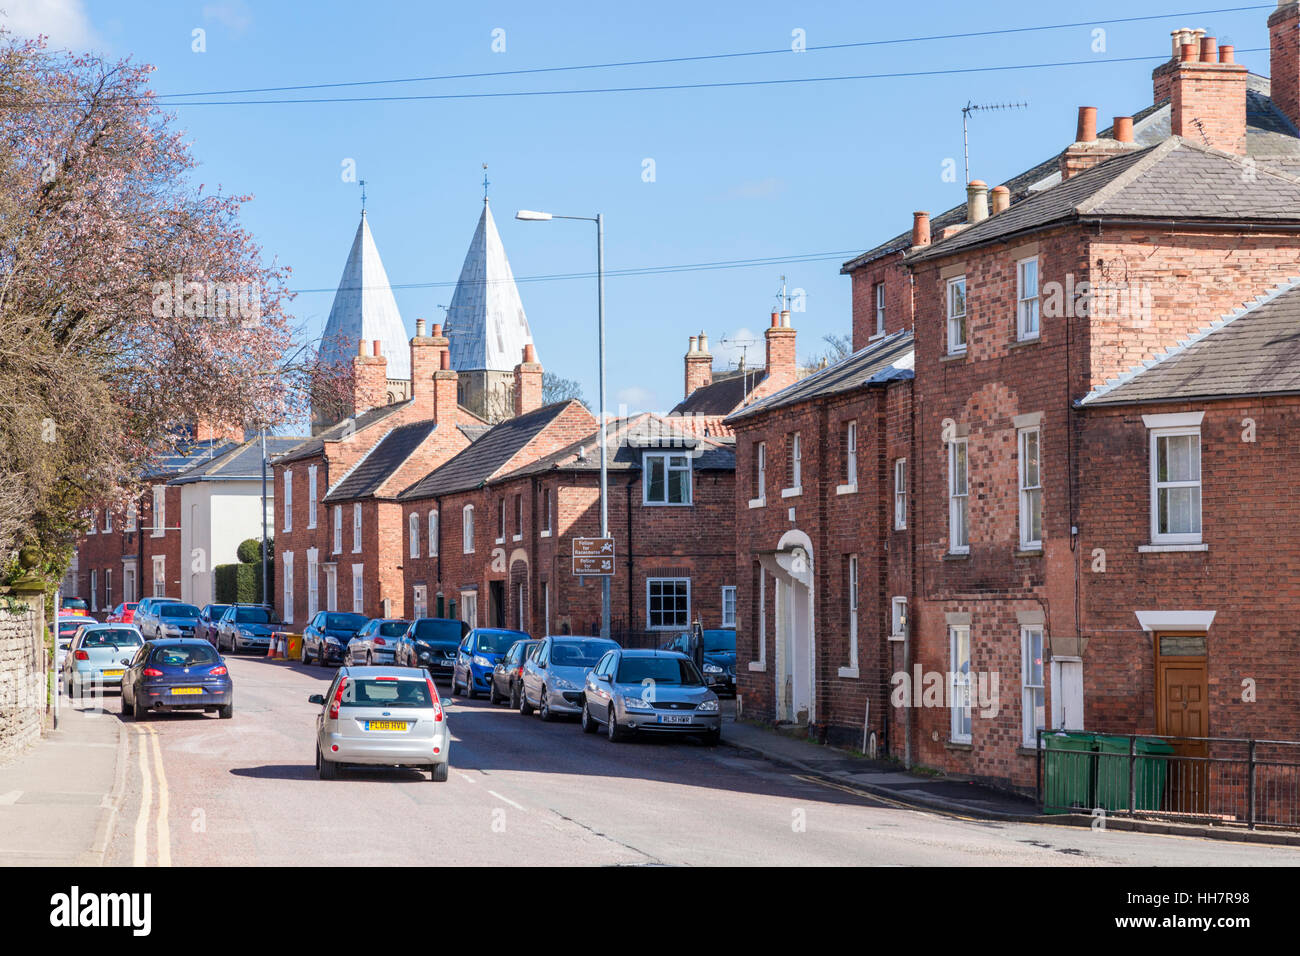 Westgate, the main road in Southwell with the spires of the Minster showing over the rooftops of the town's buildings. Nottinghamshire, England, UK Stock Photo